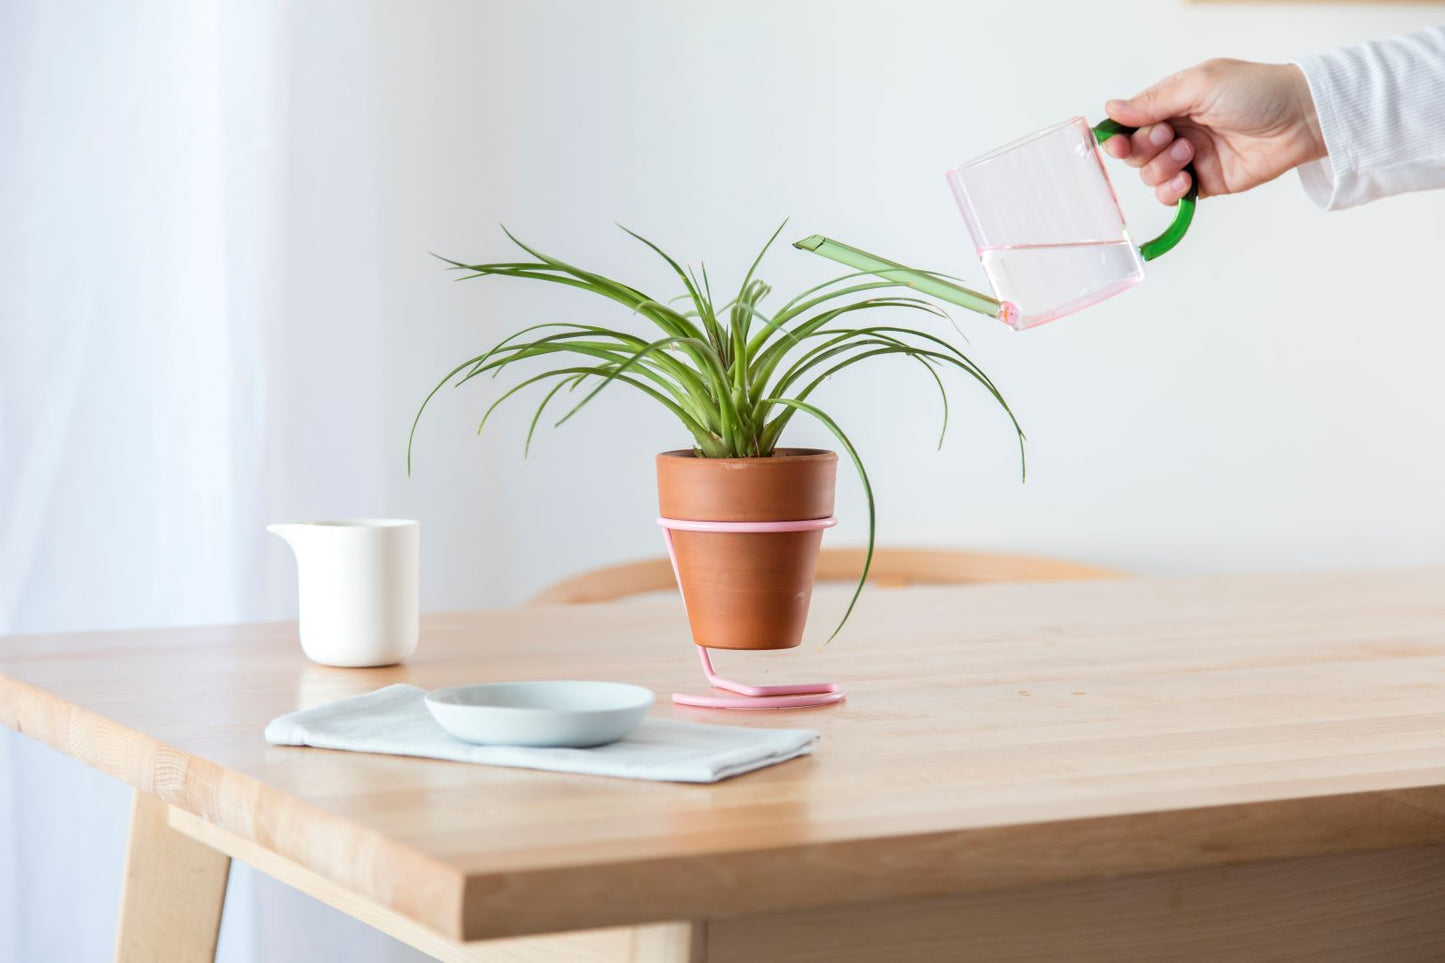 Someone watering a house plant with a pink and green glass watering can